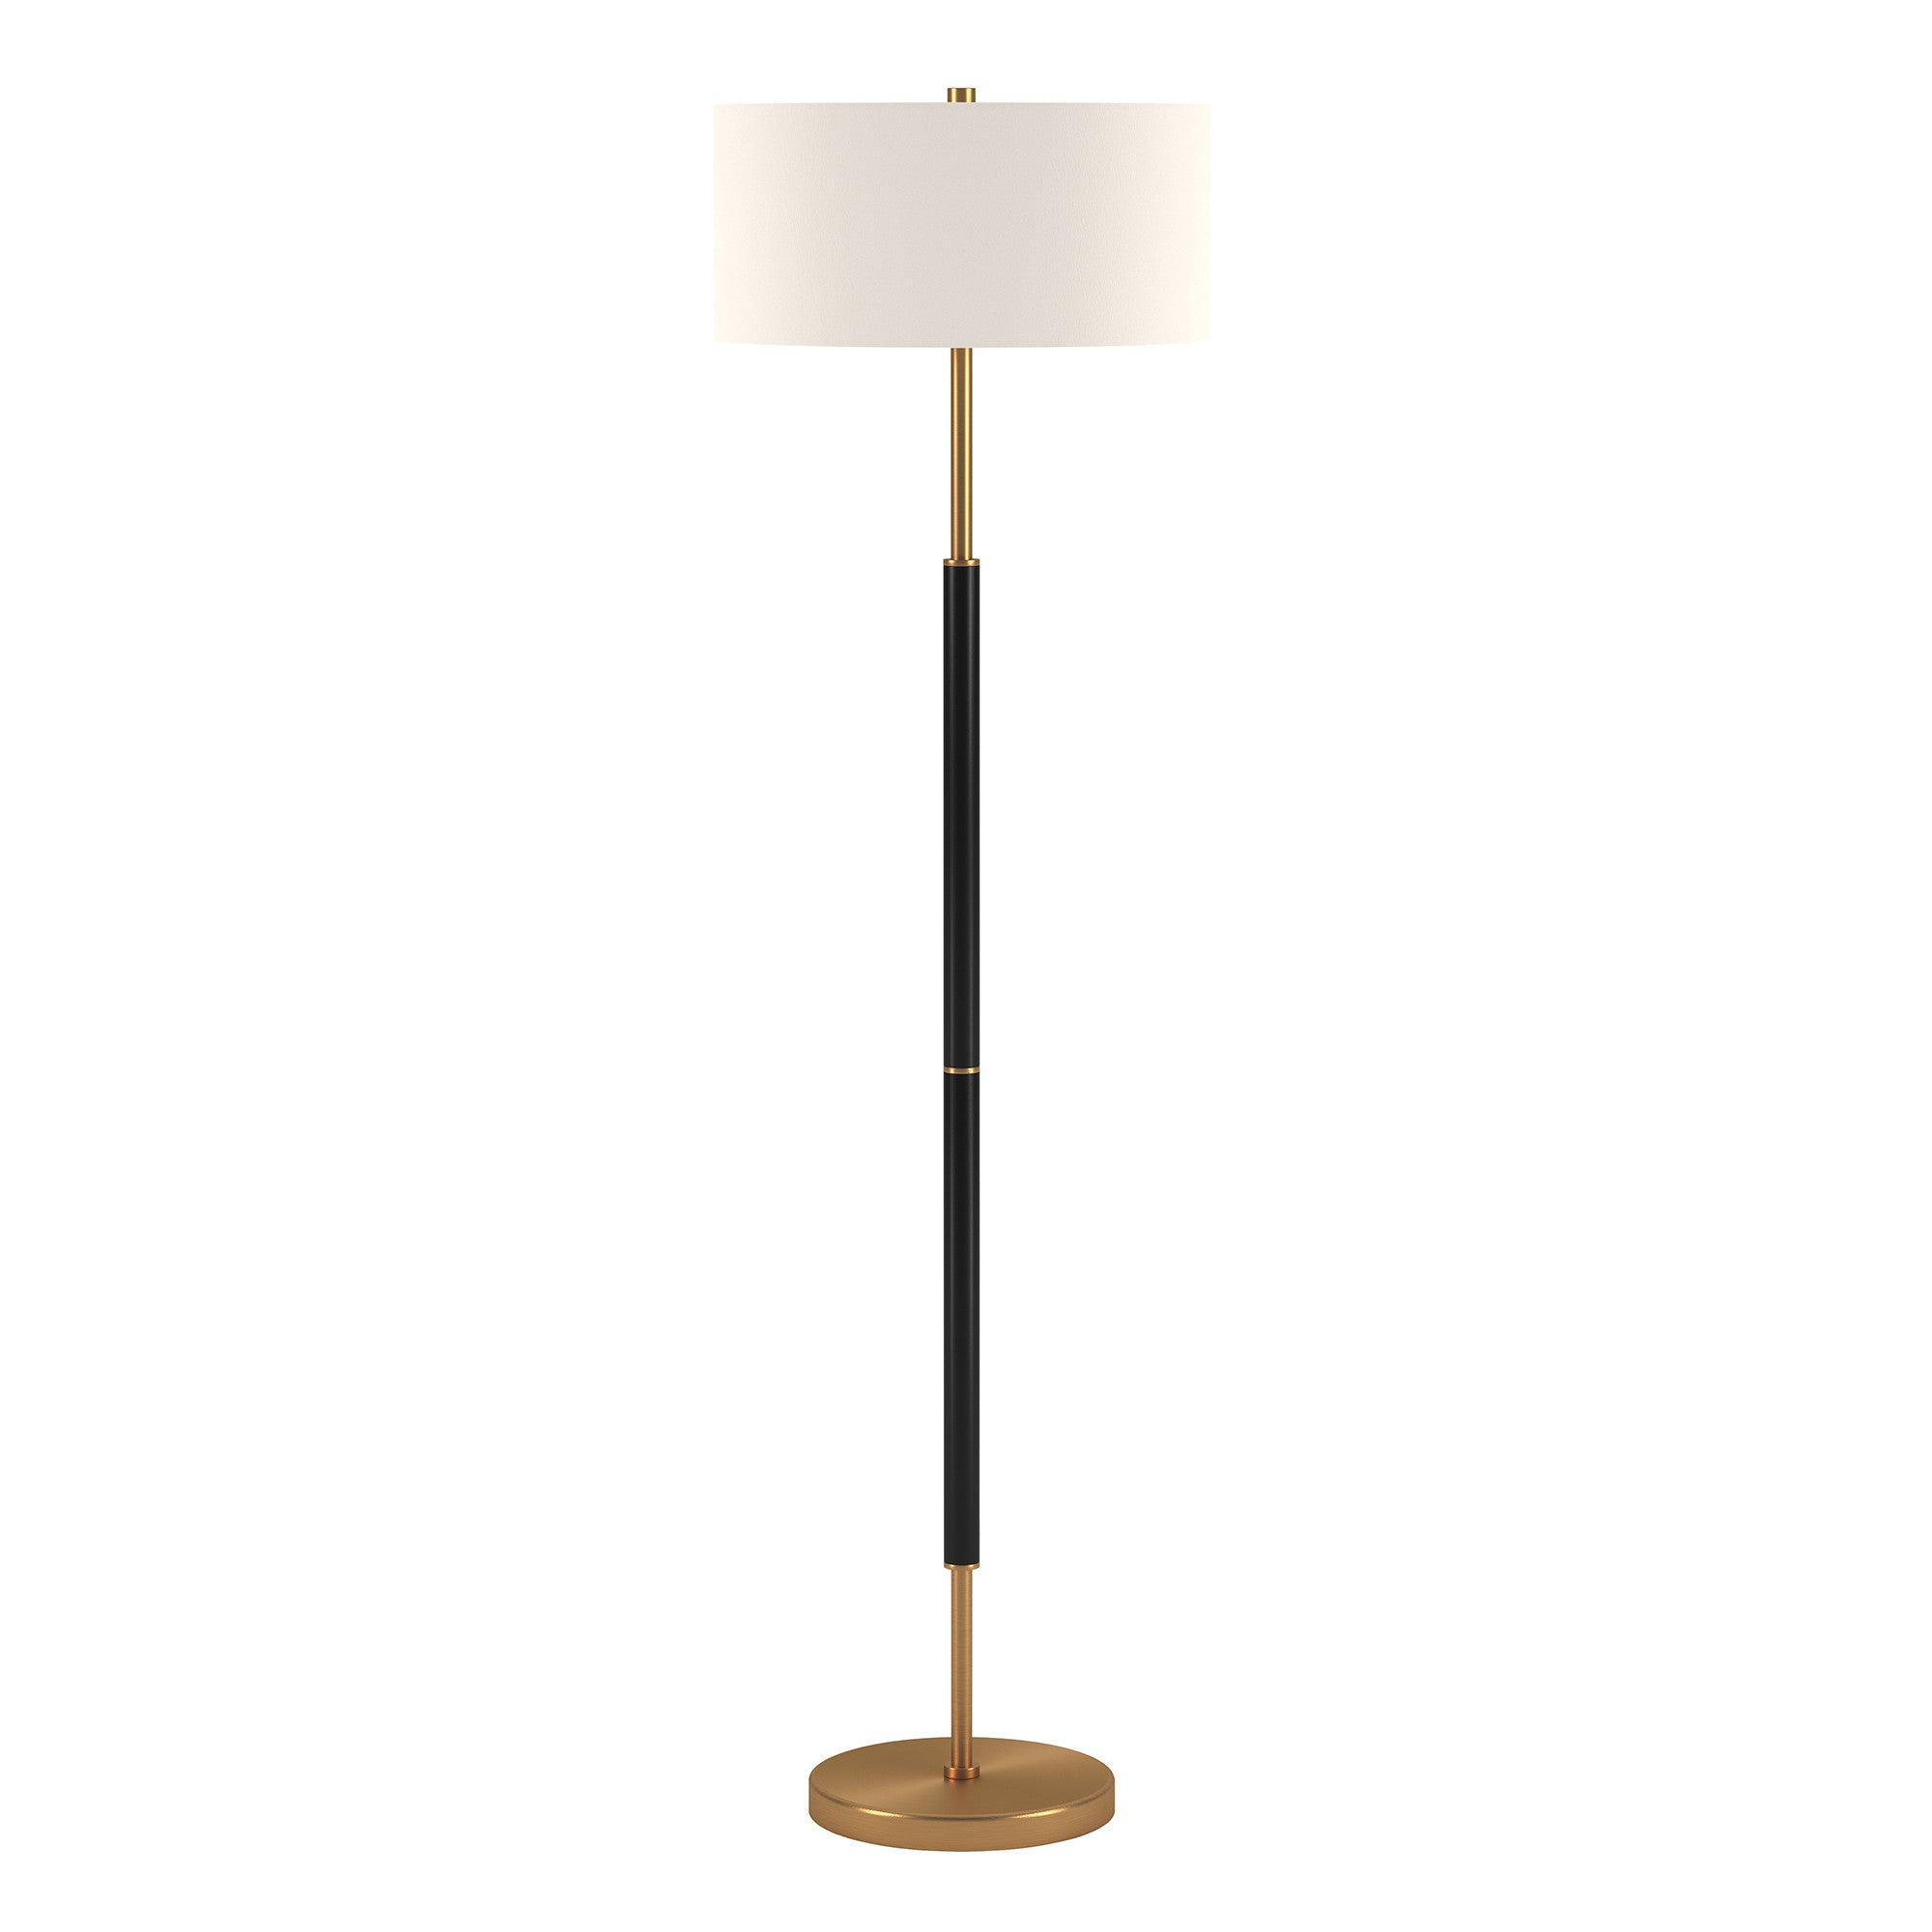 61" Black and Brass Two Light Floor Lamp With White Drum Shade